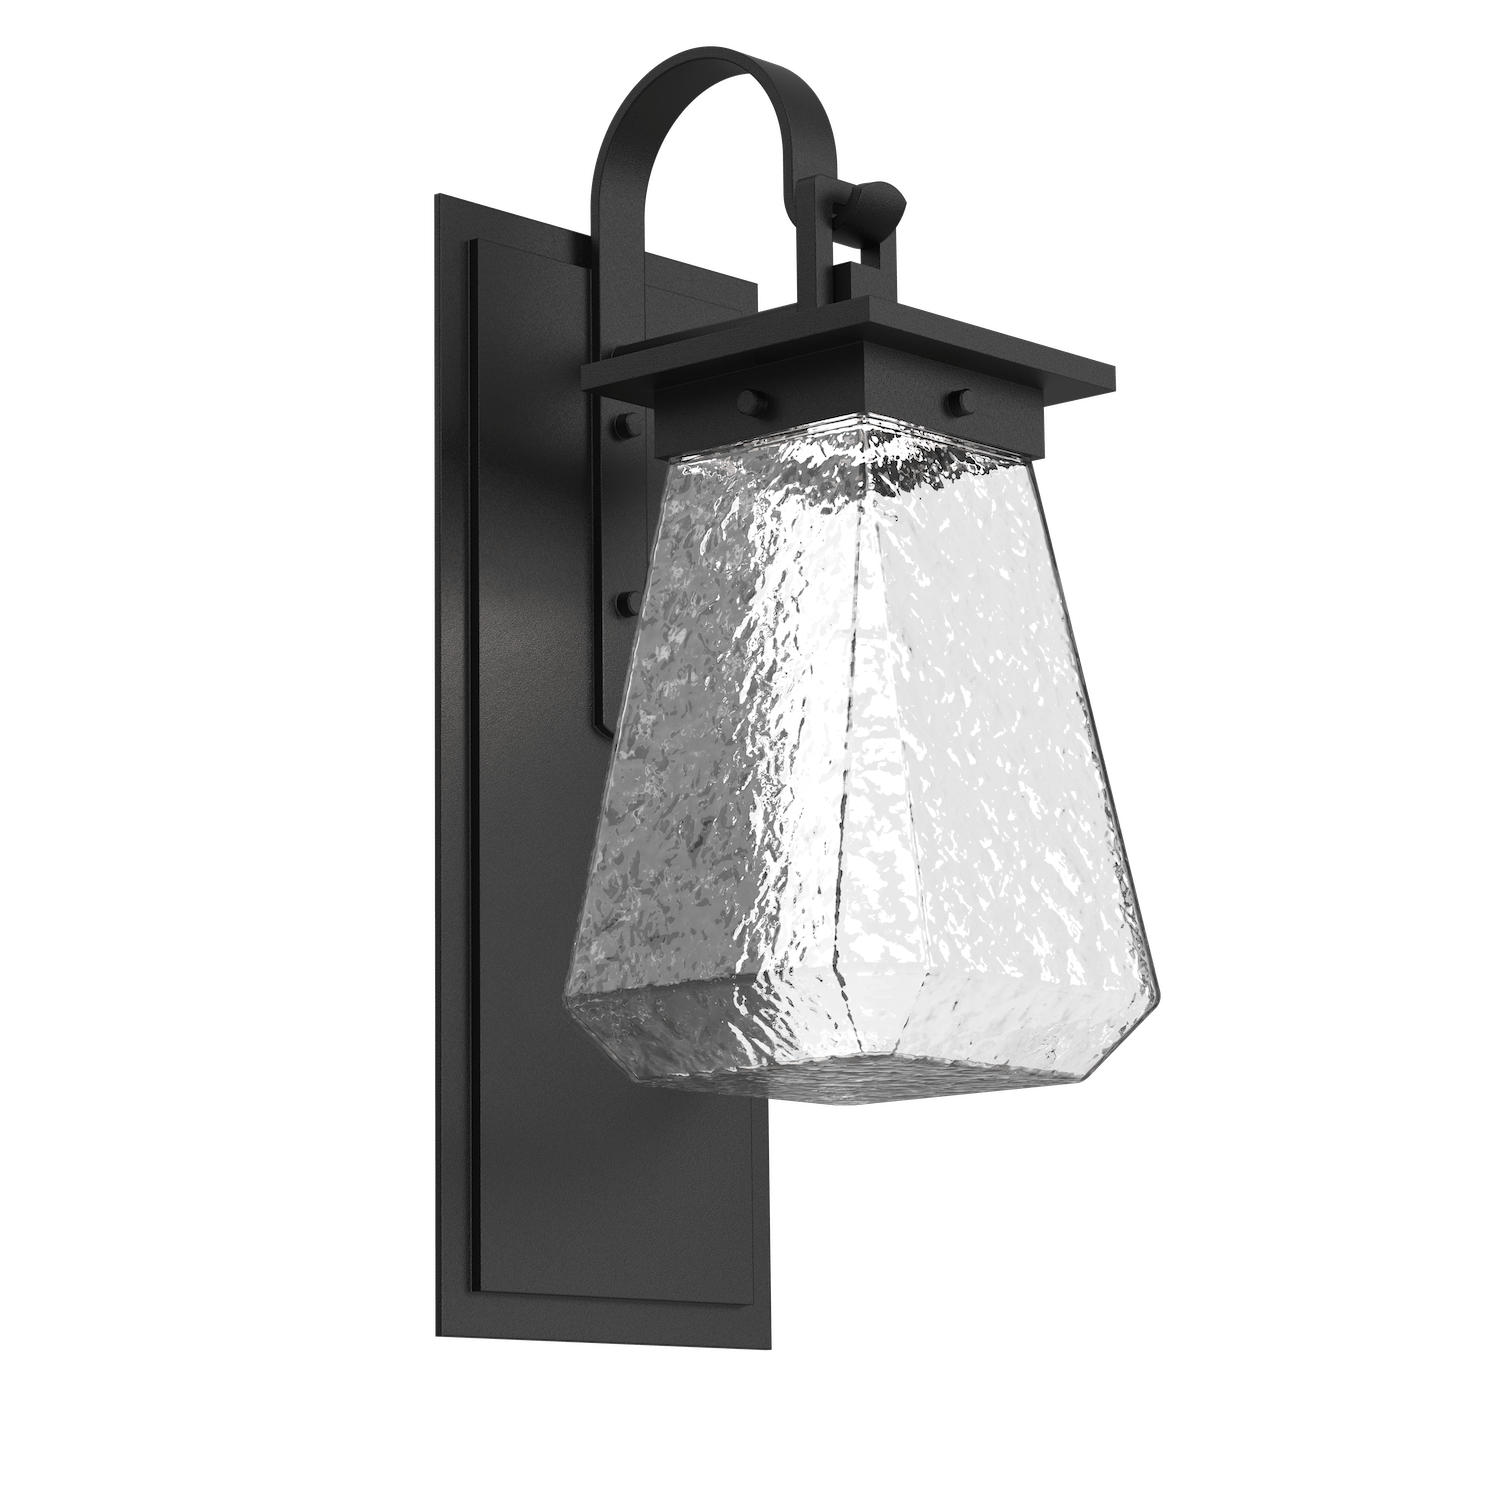 ODB0043-AC-TB-C-Hammerton-Studio-Beacon-18-inch-outdoor-sconce-with-shepherds-hook-with-textured-black-finish-and-clear-blown-glass-shades-and-LED-lamping